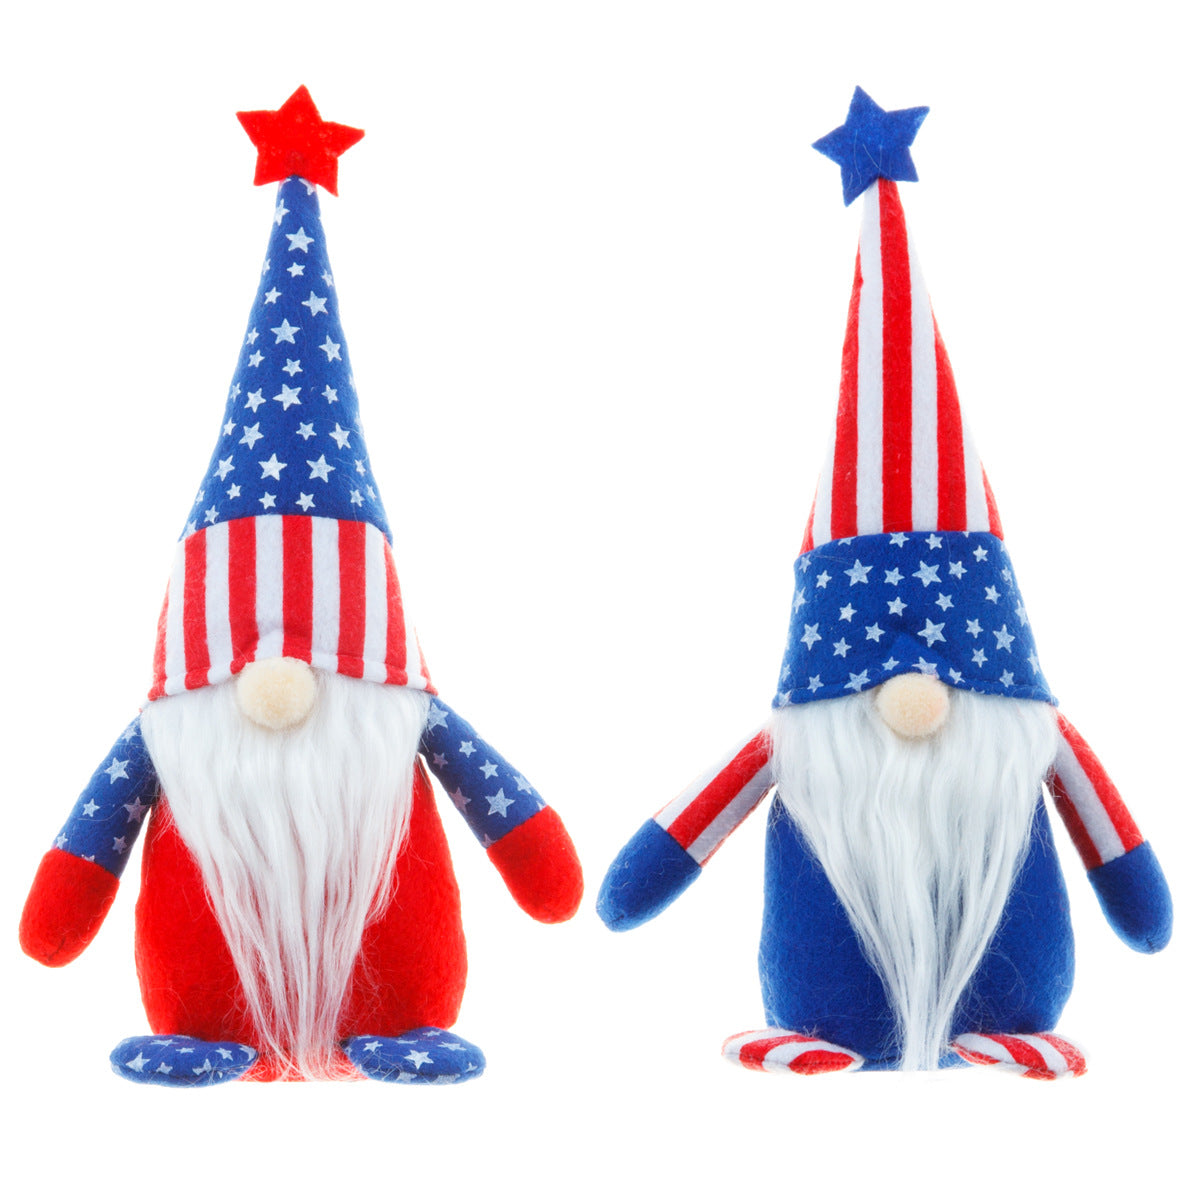 Stars Pointed Hat 4th of july gnomes, 4th July gnomes, Independence Day gnomes, Patriotic gnomes, American flag gnomes, Uncle Sam gnomes, Fireworks gnomes, Red, white, and blue gnomes, Bald eagle gnomes, Liberty bell gnomes, Stars and stripes gnomes, Statue of Liberty gnomes, Patriotic decorations, Happy Independence Day gnomes